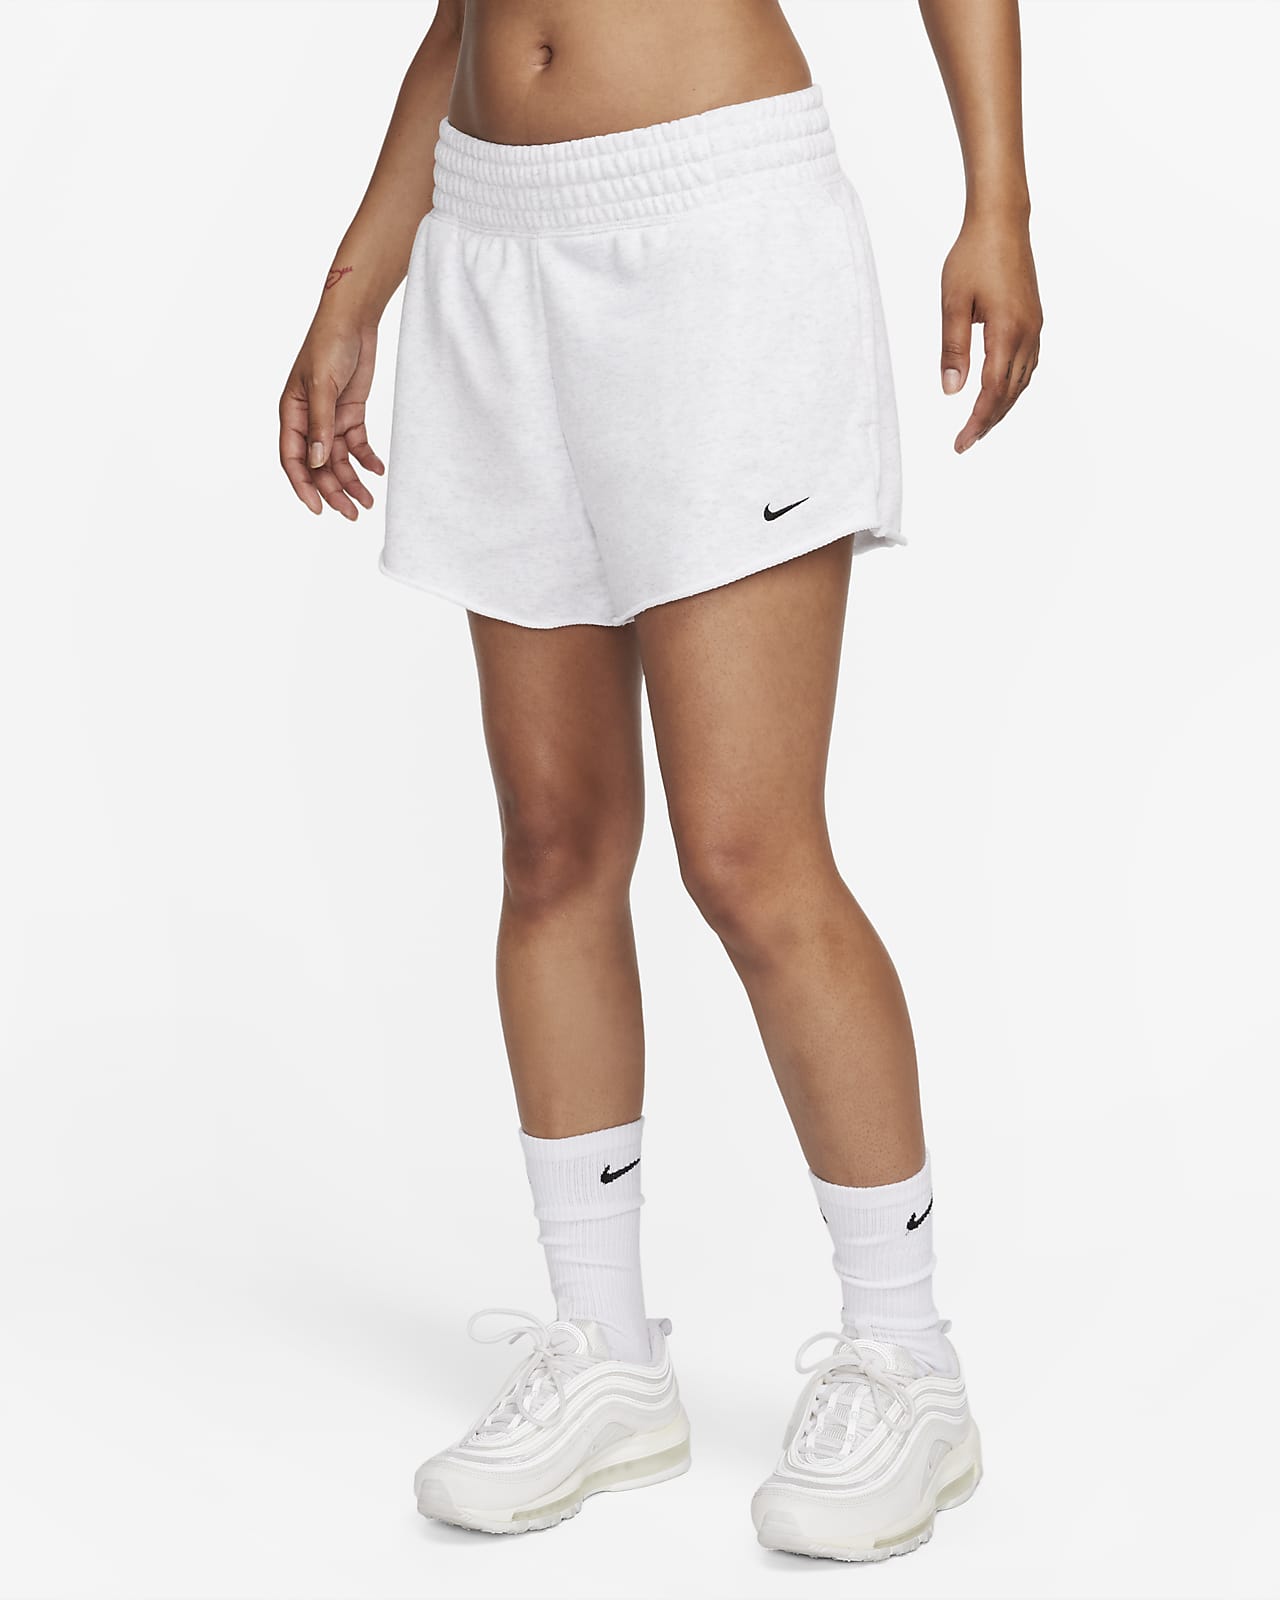 https://static.nike.com/a/images/t_PDP_1280_v1/f_auto,q_auto:eco/98e25d37-86dc-4933-9b79-3fb7c28e2aa0/sportswear-womens-high-waisted-french-terry-shorts-B9tWLD.png